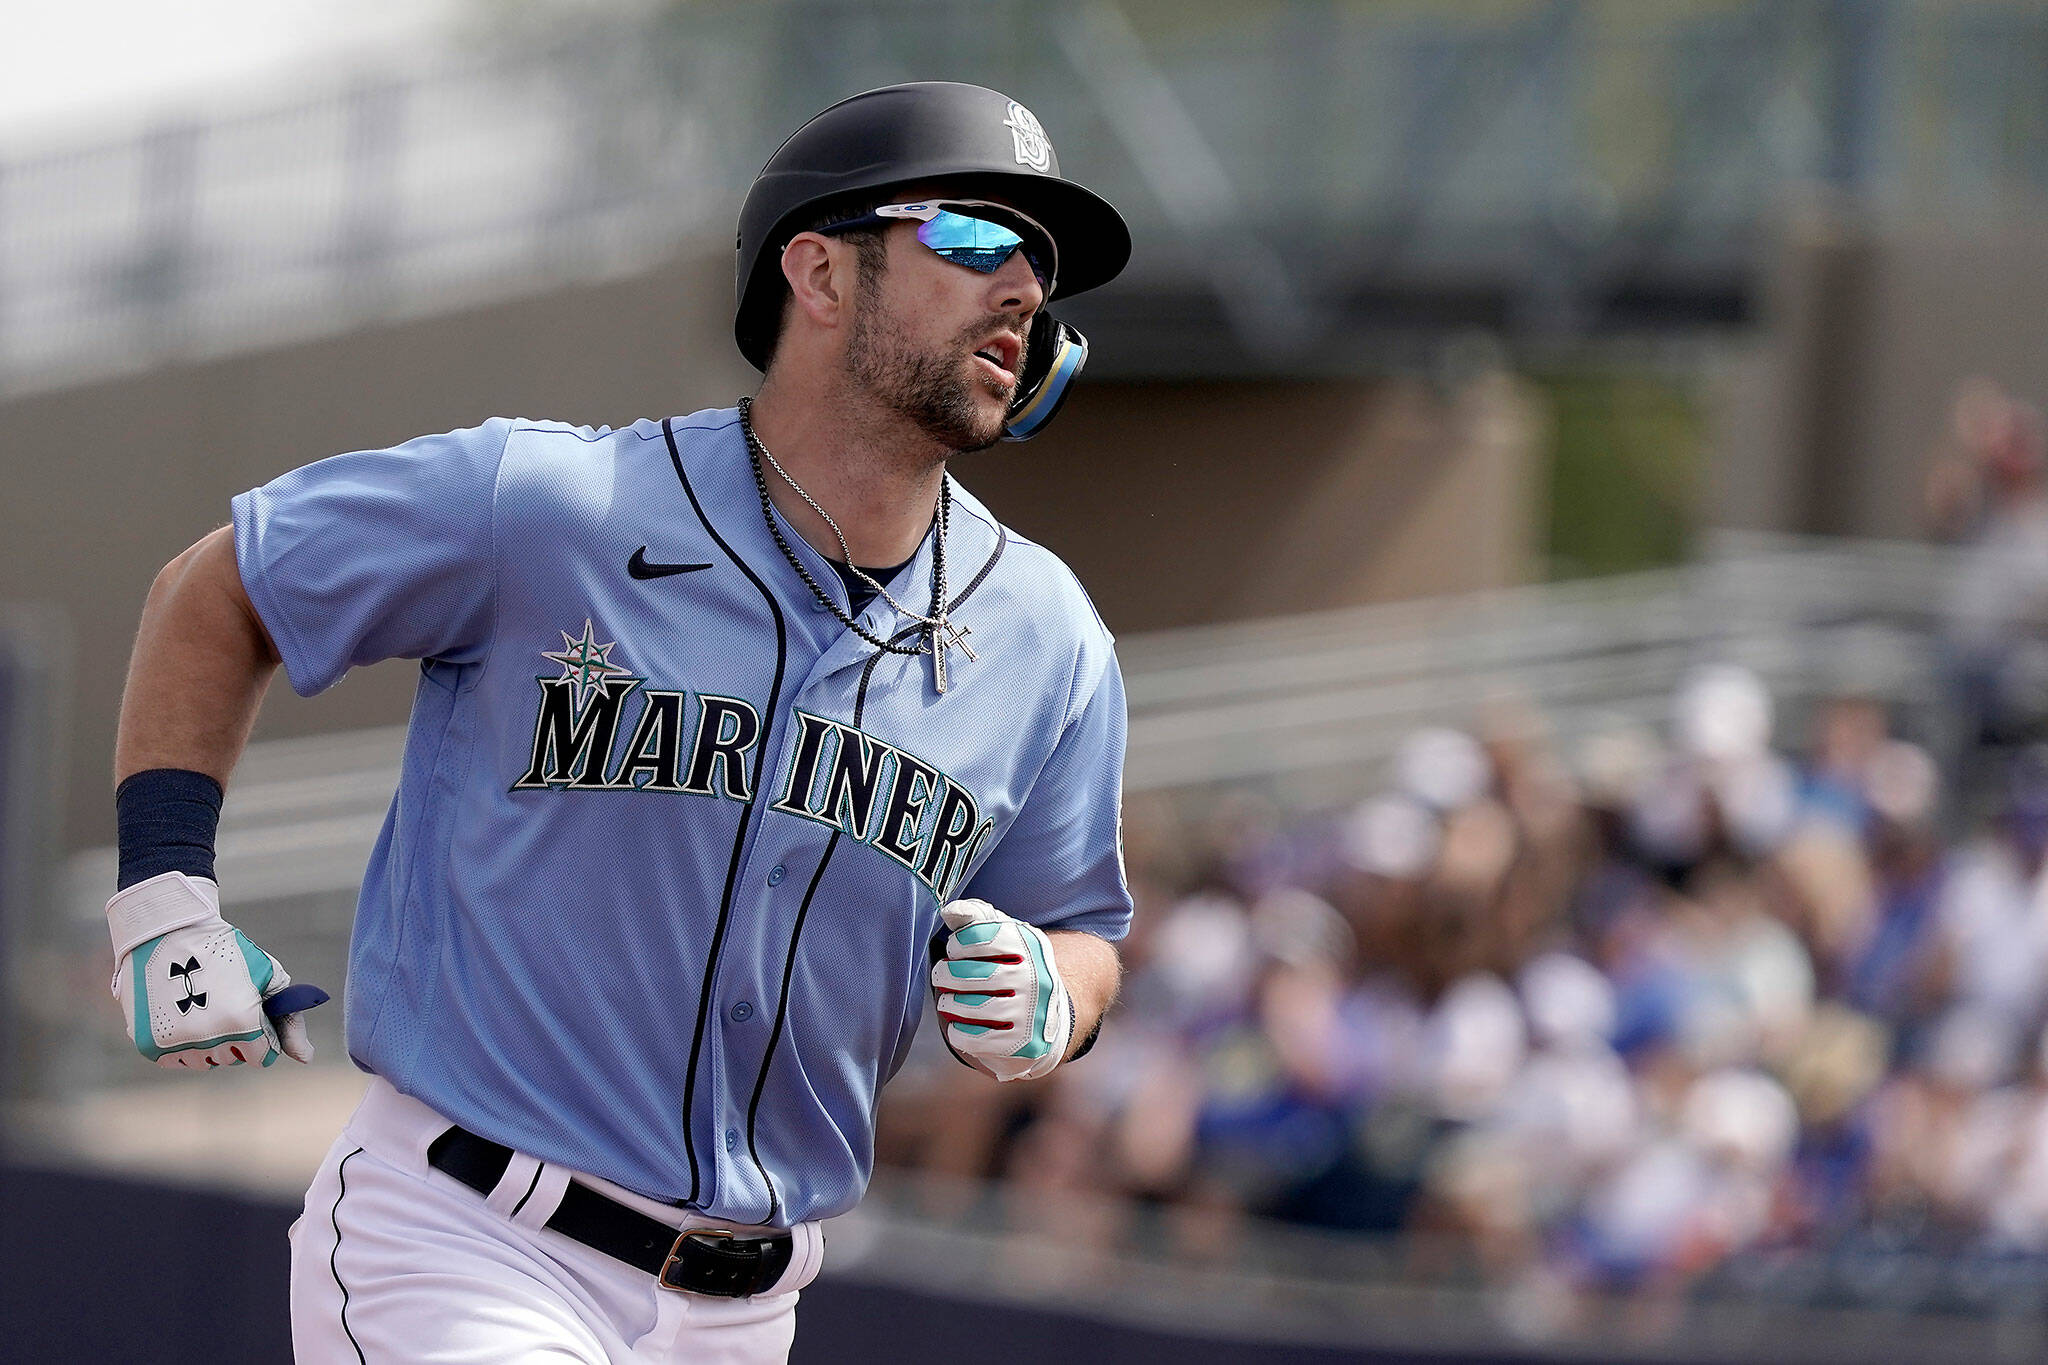 The Mariners’ Steven Souza Jr., a Cascade High School graduate, rounds the bases after hitting a grand slam during the first inning of a spring training game against the Dodgers on March 19 in Peoria, Arizona. (AP Photo/Charlie Riedel)